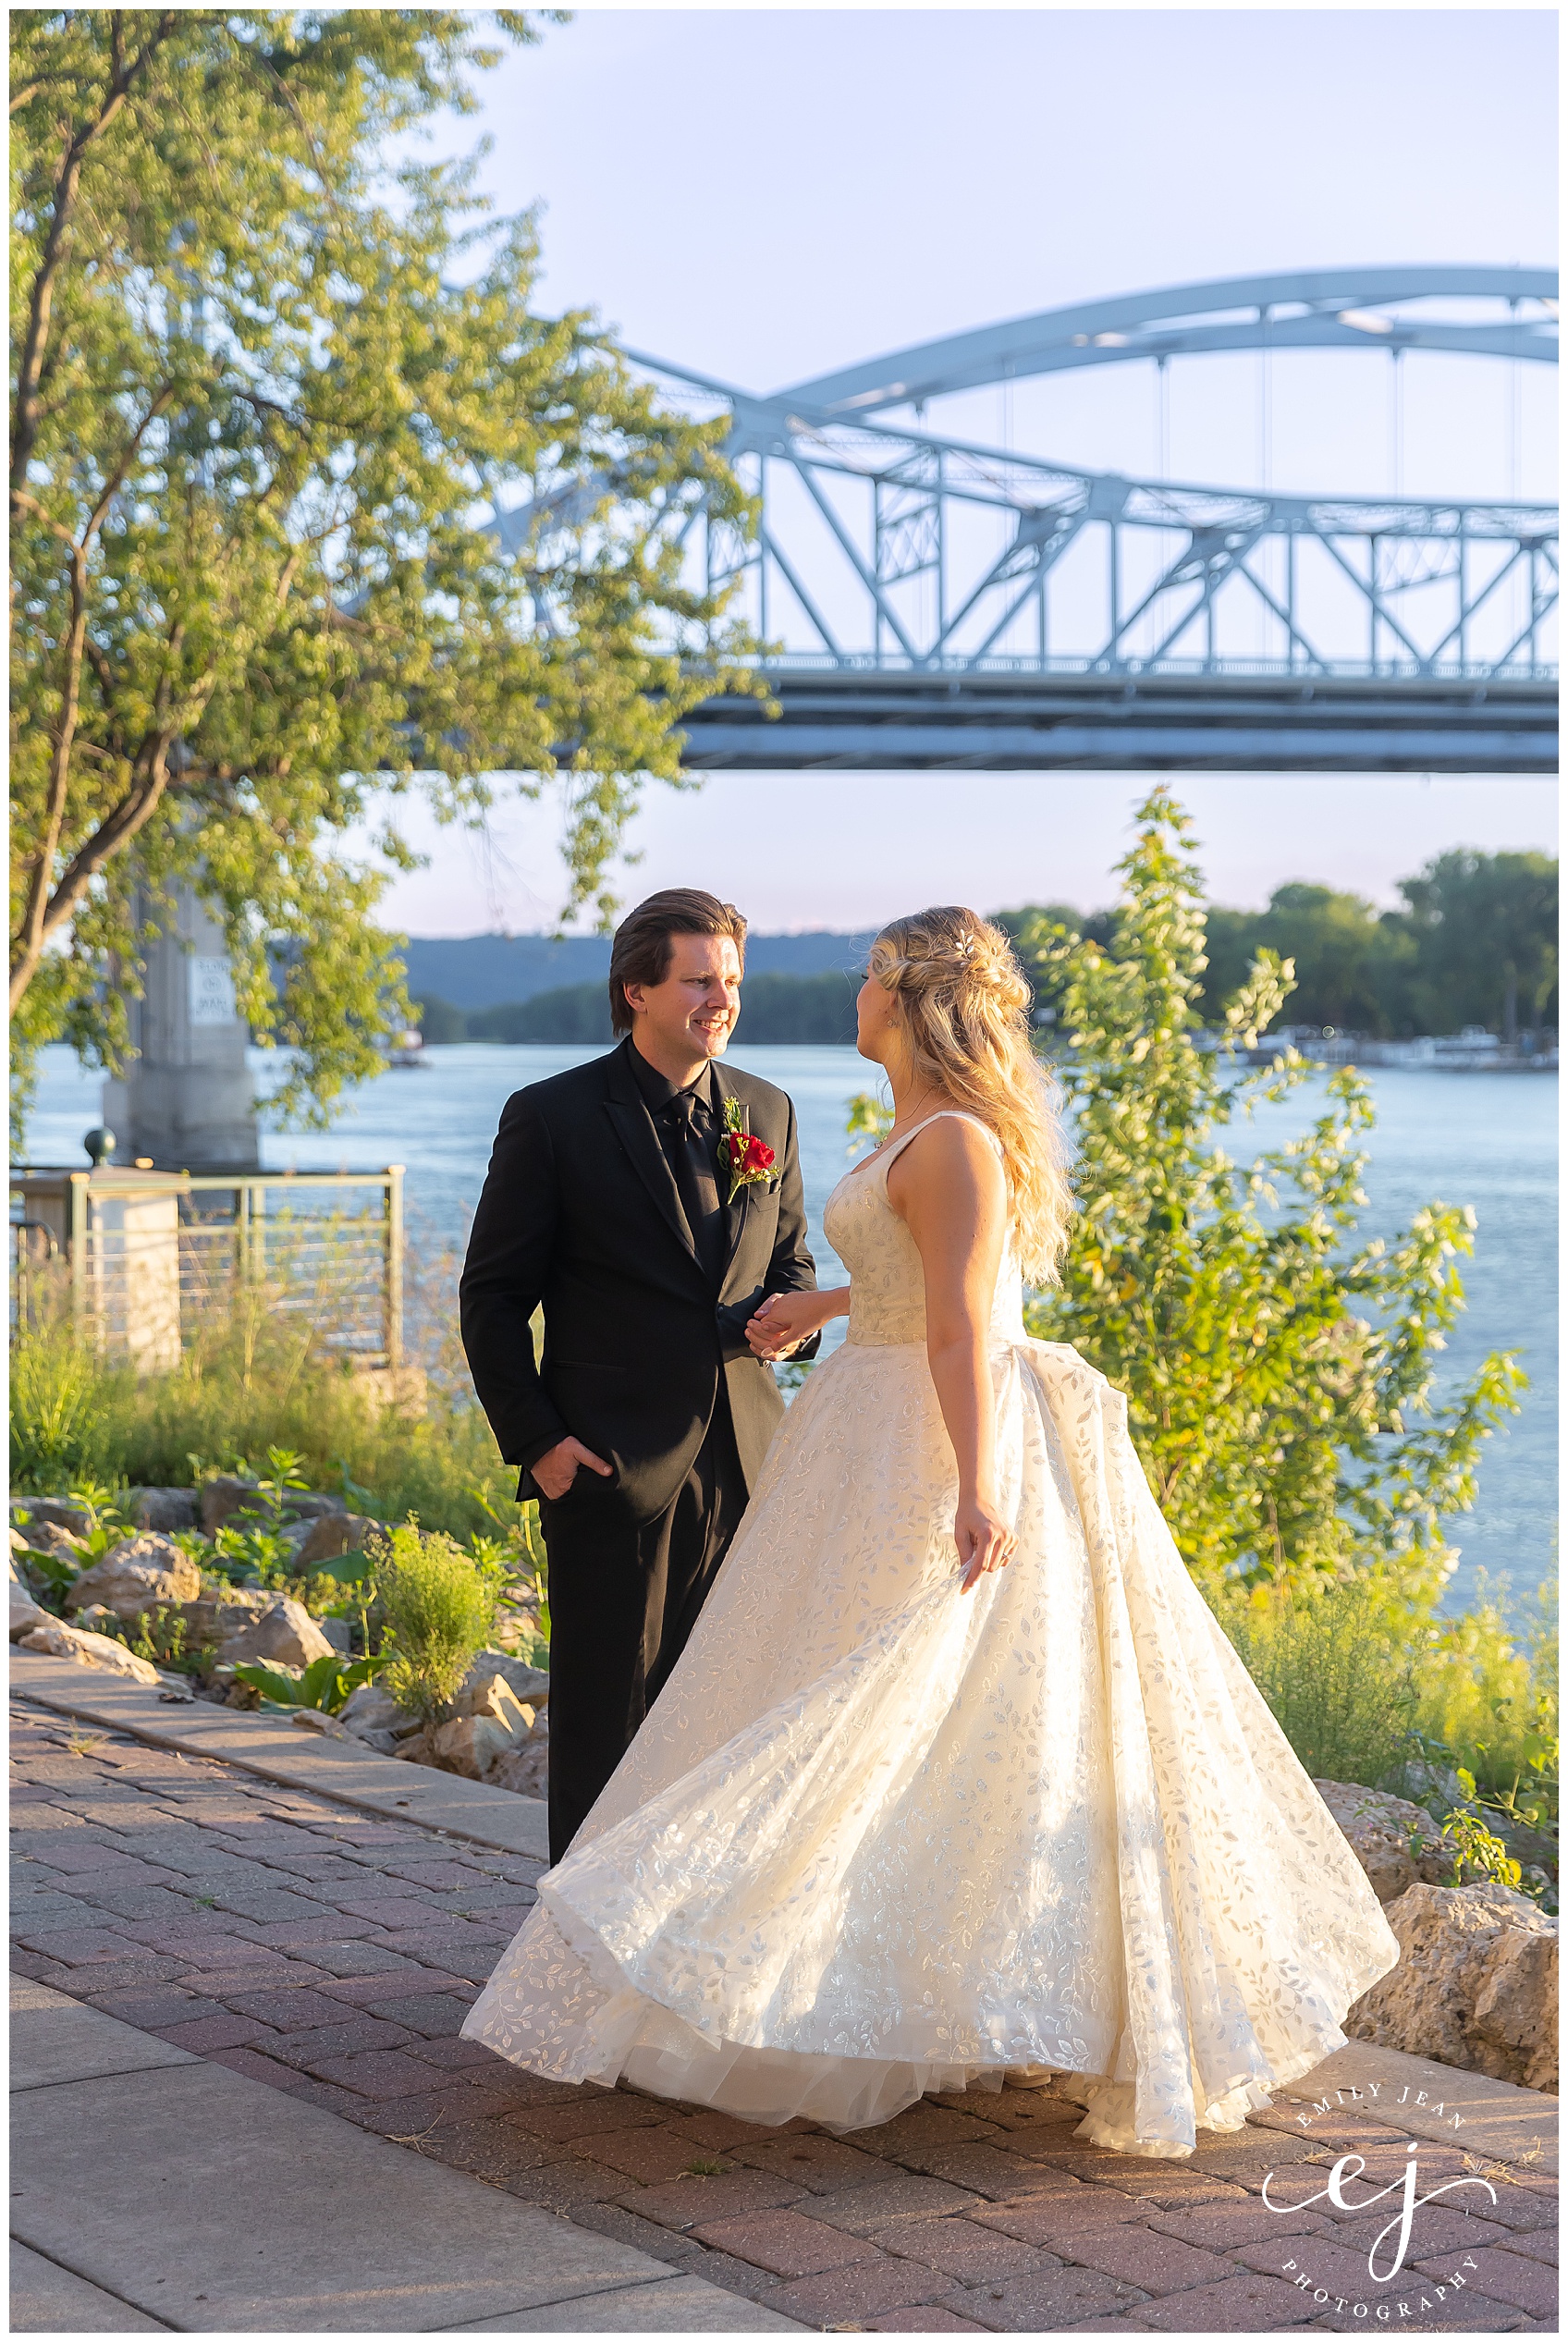 Bride and groom outside in the sunset near the big blue bridge